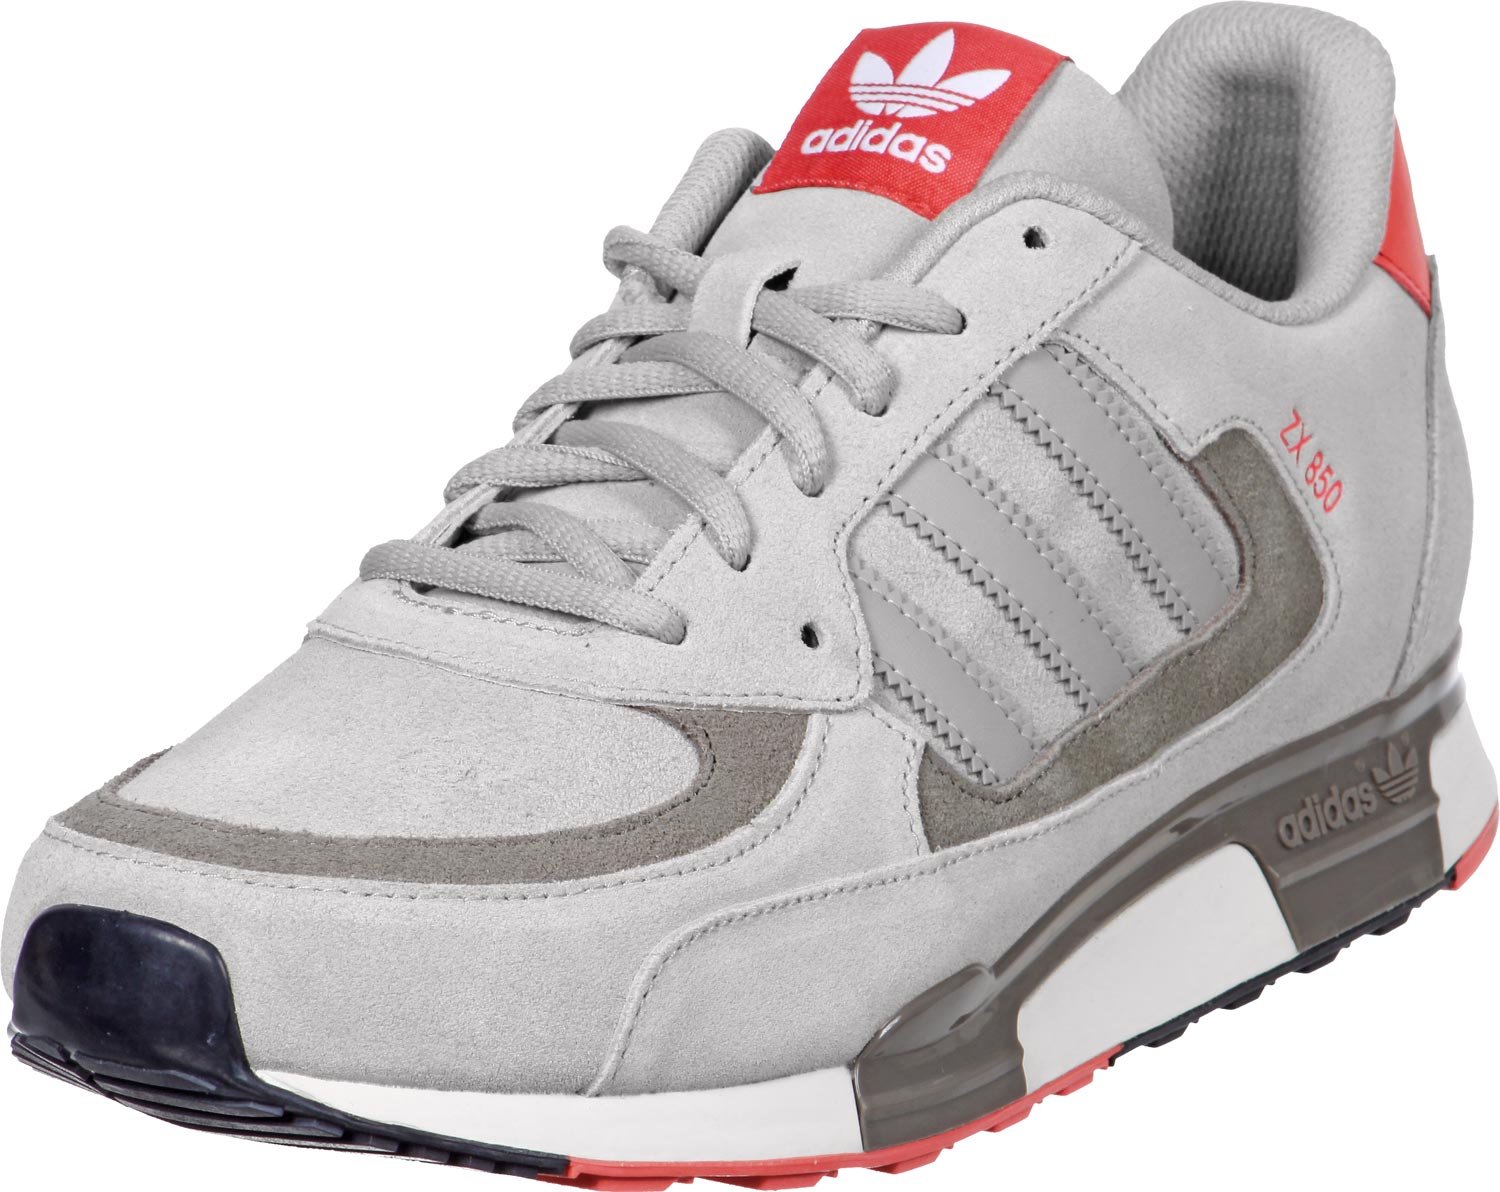 adidas zx 850 2014 homme